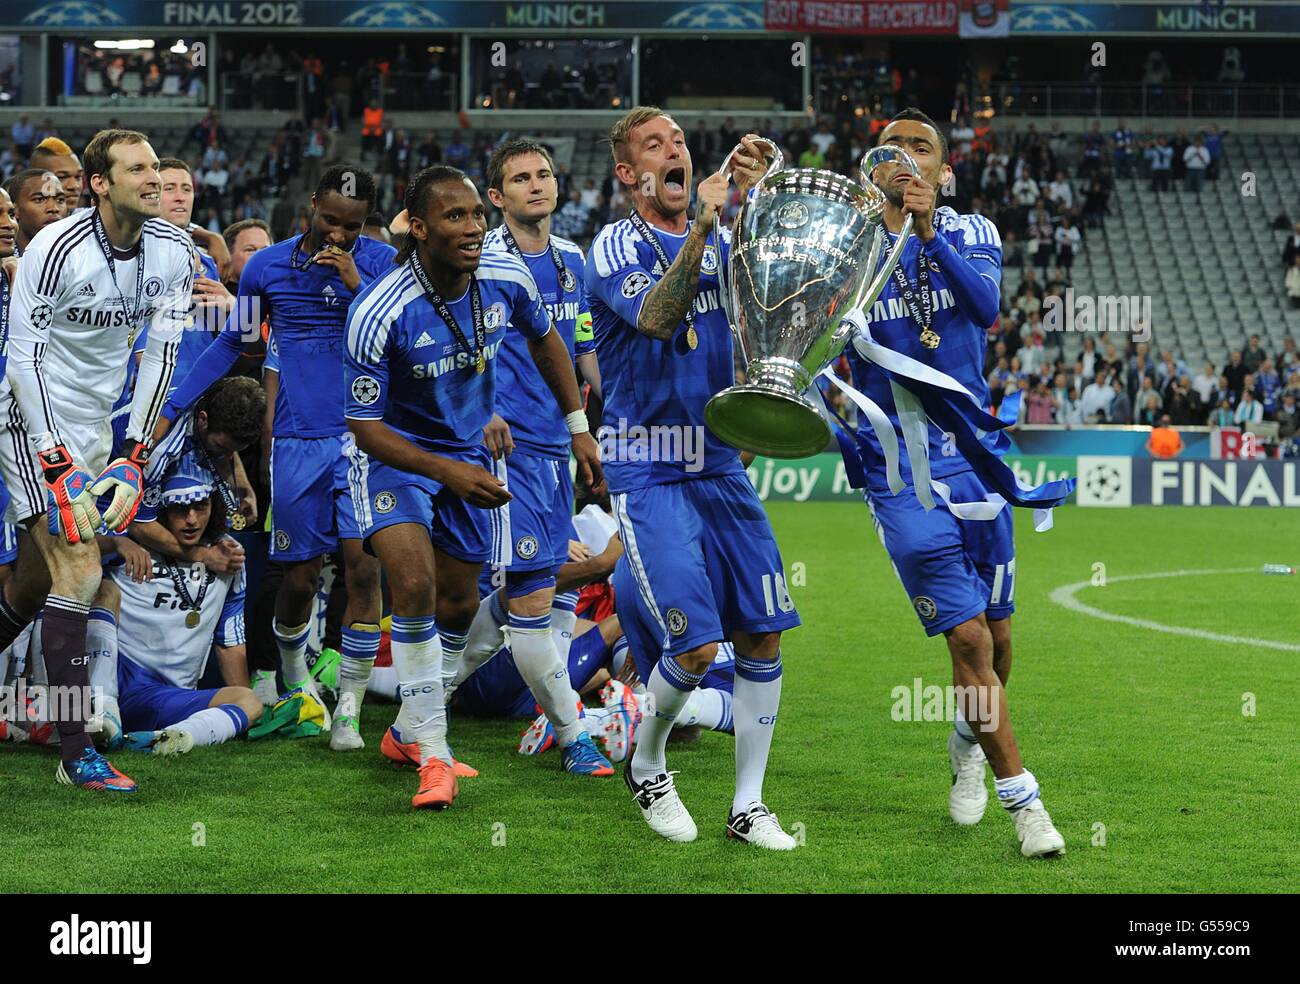 Chelsea's Jose Bosingwa (right) and Raul Meireles (second right) celebrate winning the UEFA Champions League, after the final whistle Stock Photo